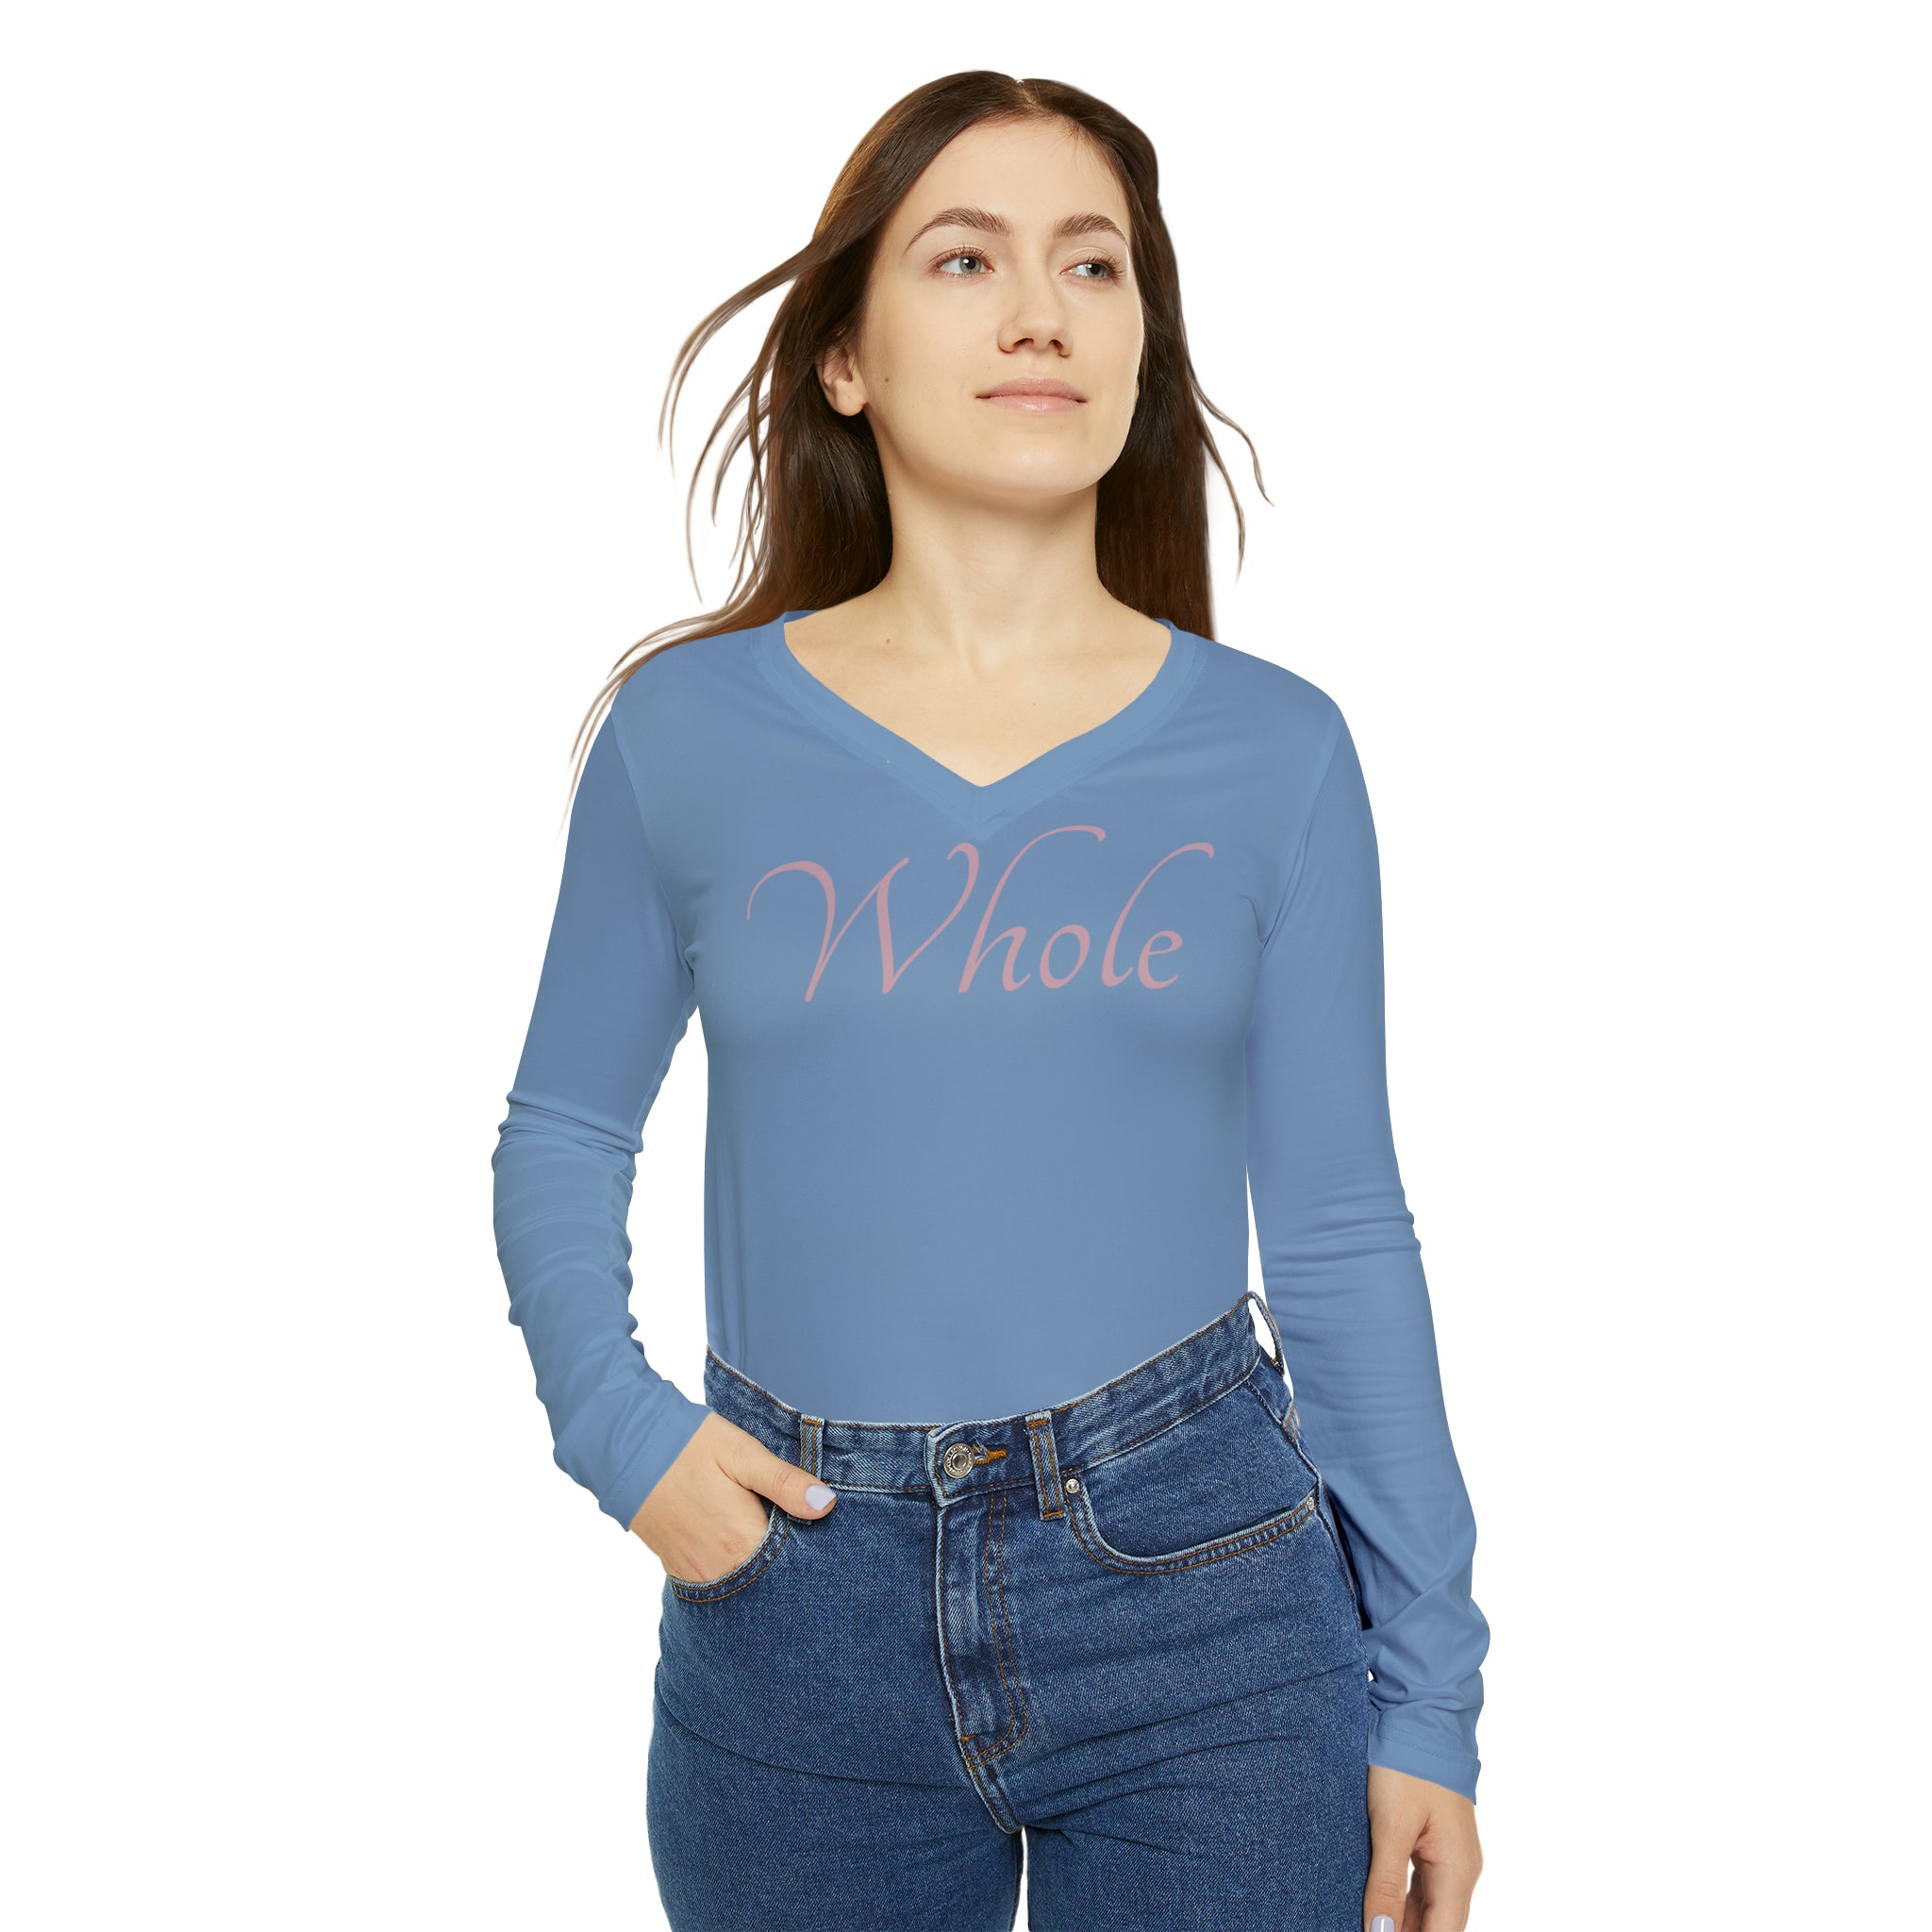 Whole Awareness Long Sleeve V-neck Casual Shirt Double Needle Stitching Everyday Wear Mental Health Donation Polyester Spandex Blend Statement Shirt Whole Shirt All Over Prints 9228081243907884331_2048 Printify